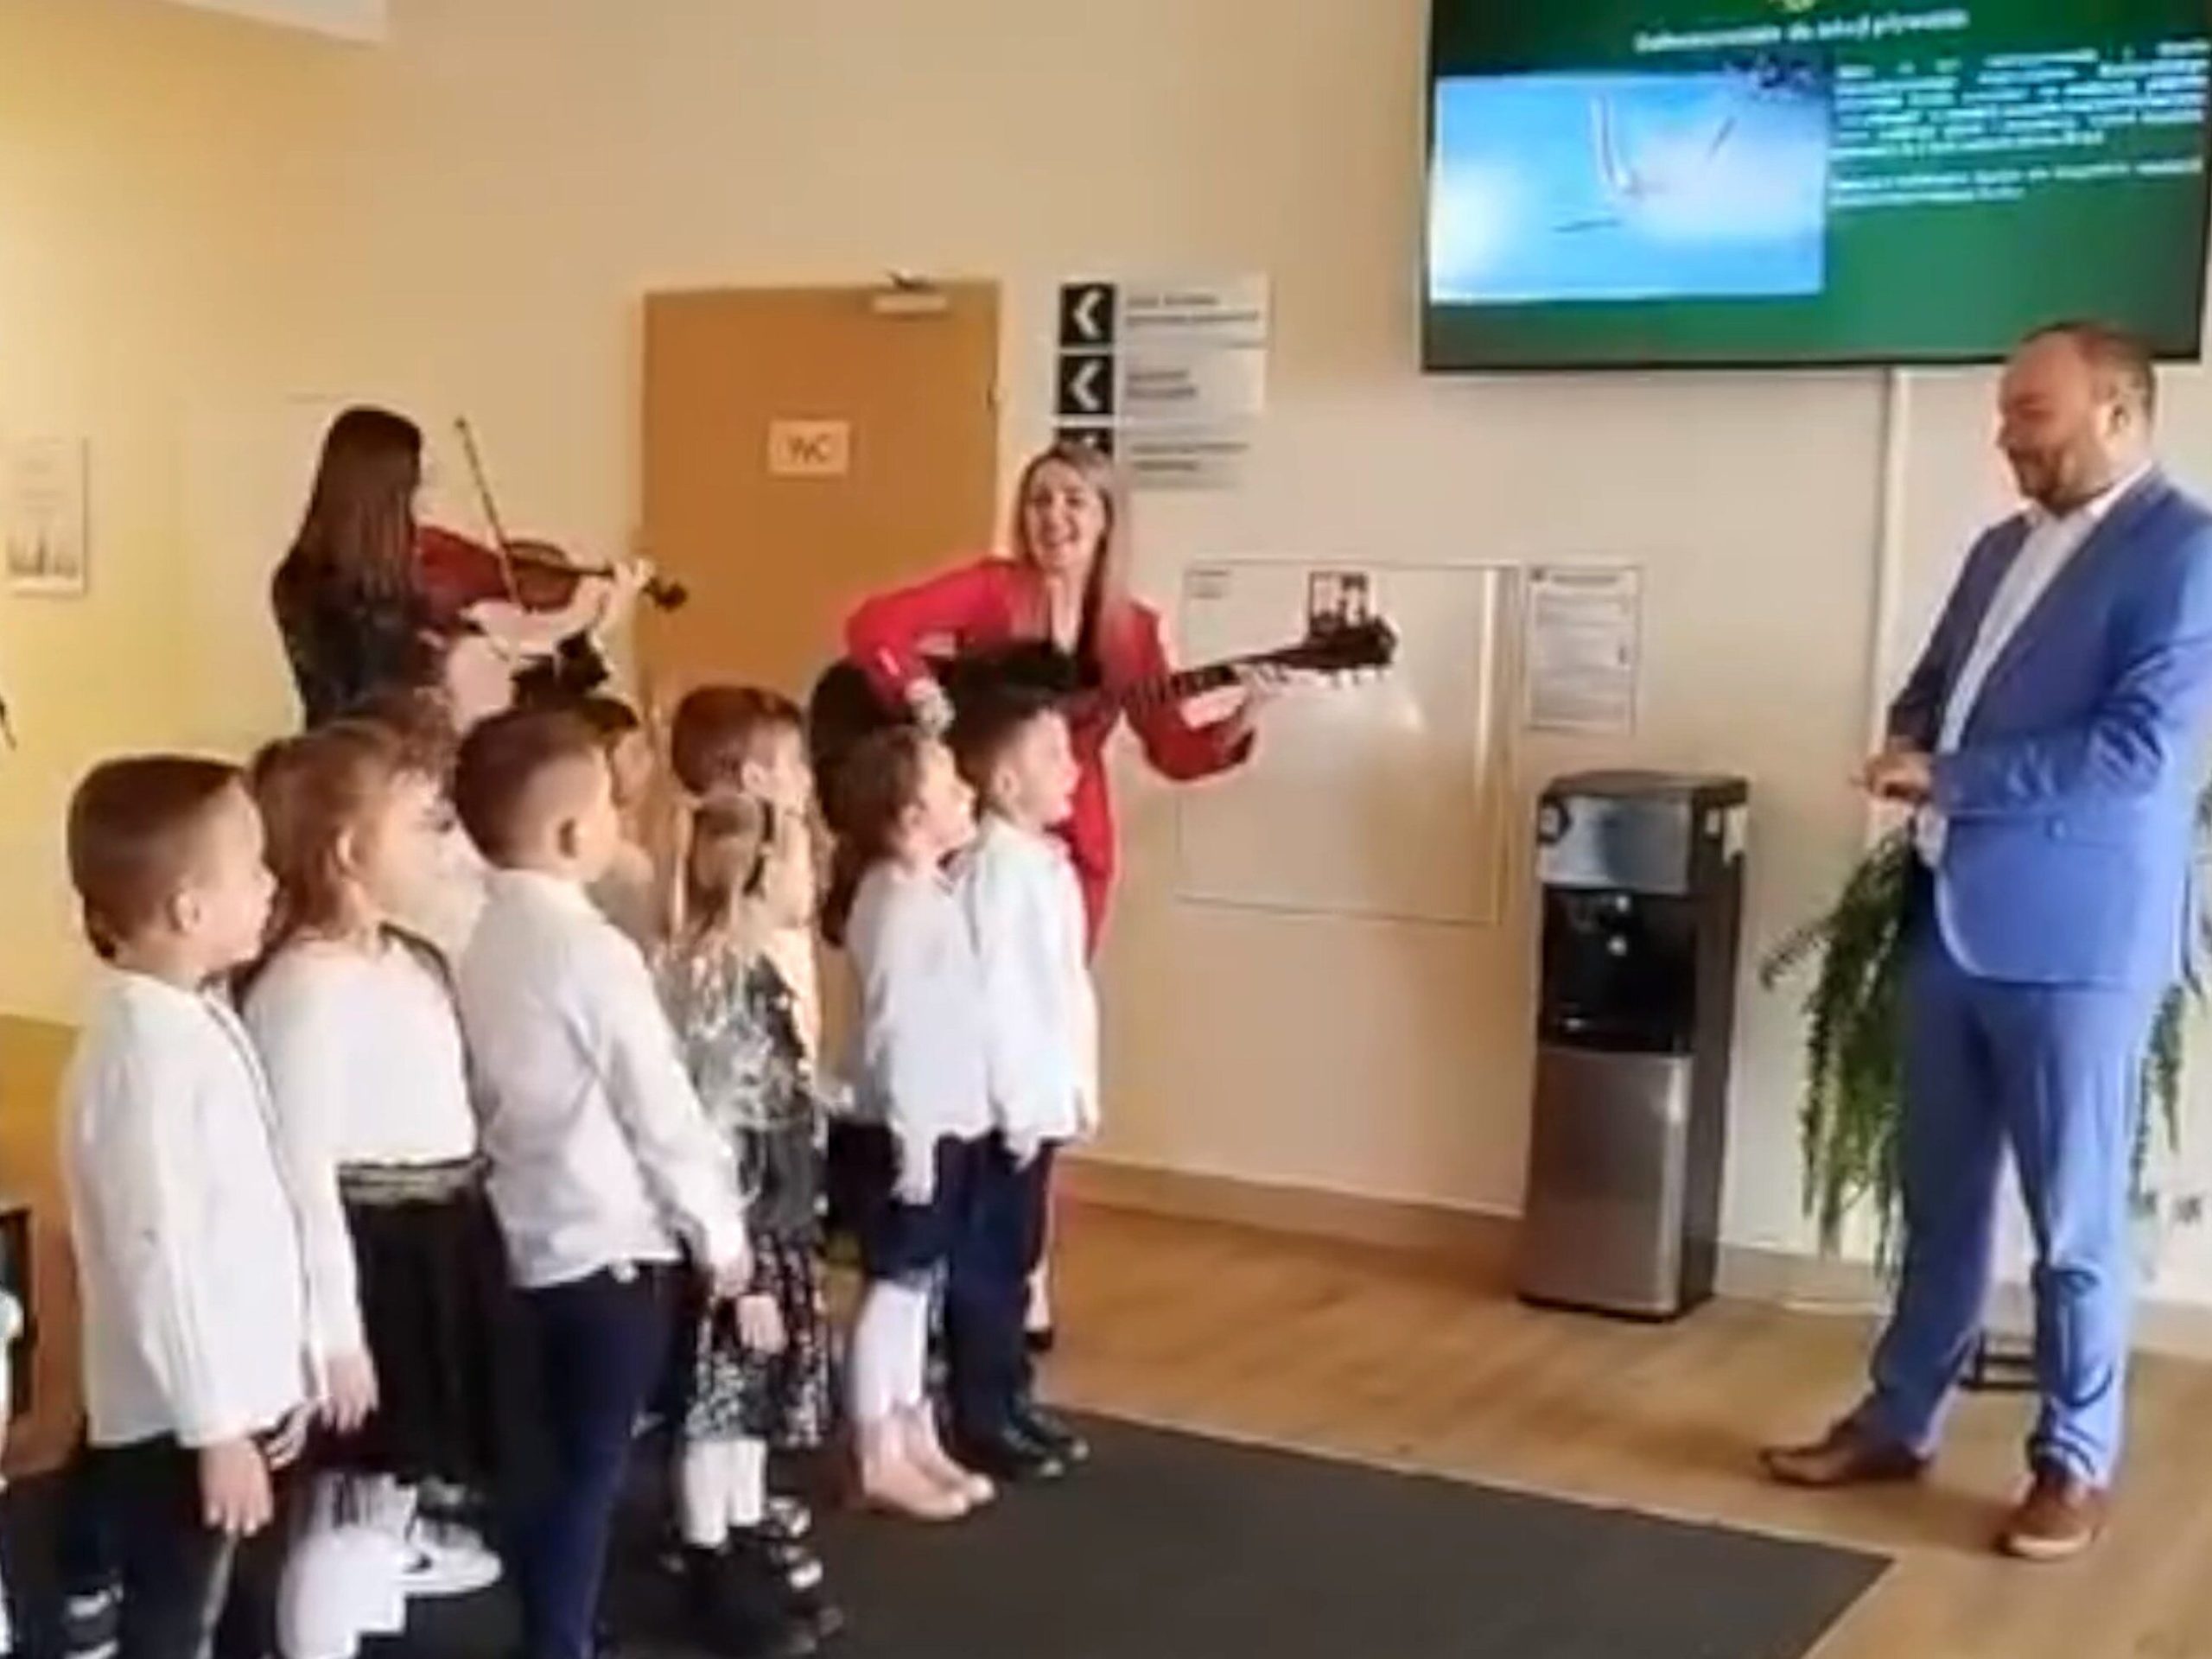 "Mr. Mayor, beloved, given to us by God."  Controversy after the preschoolers' anthem